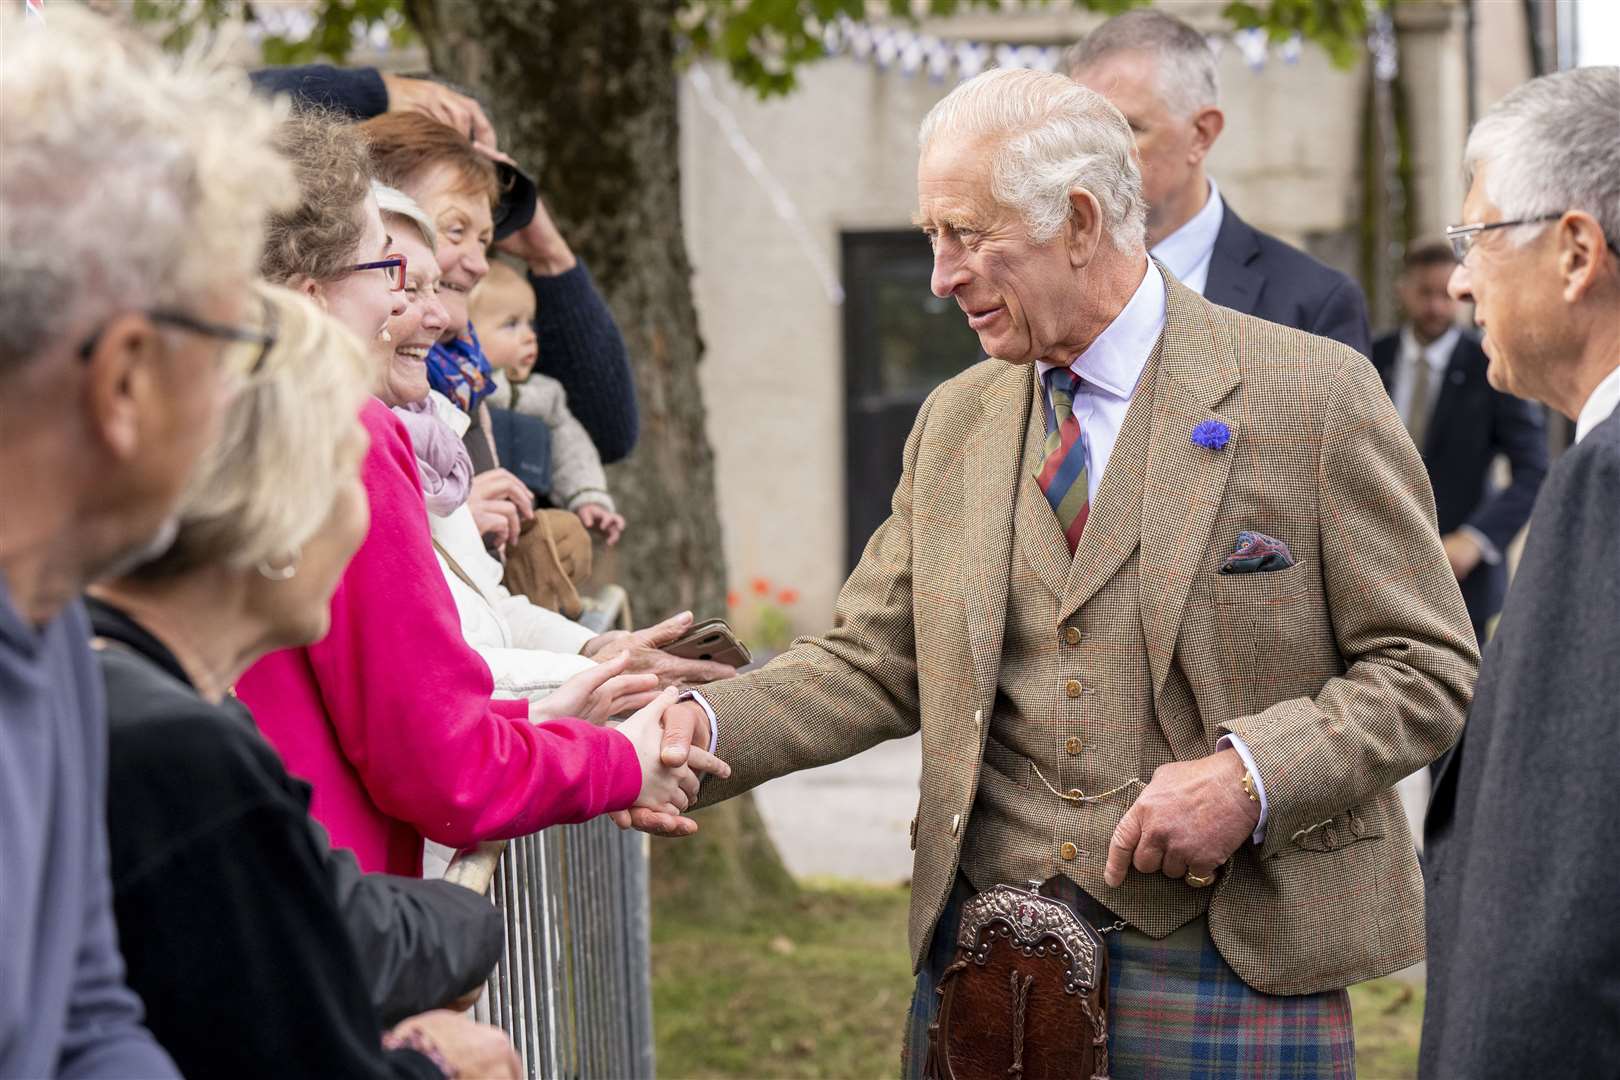 The King was greeted by well-wishers during his walkabout in Tomintoul (Jane Barlow/PA)